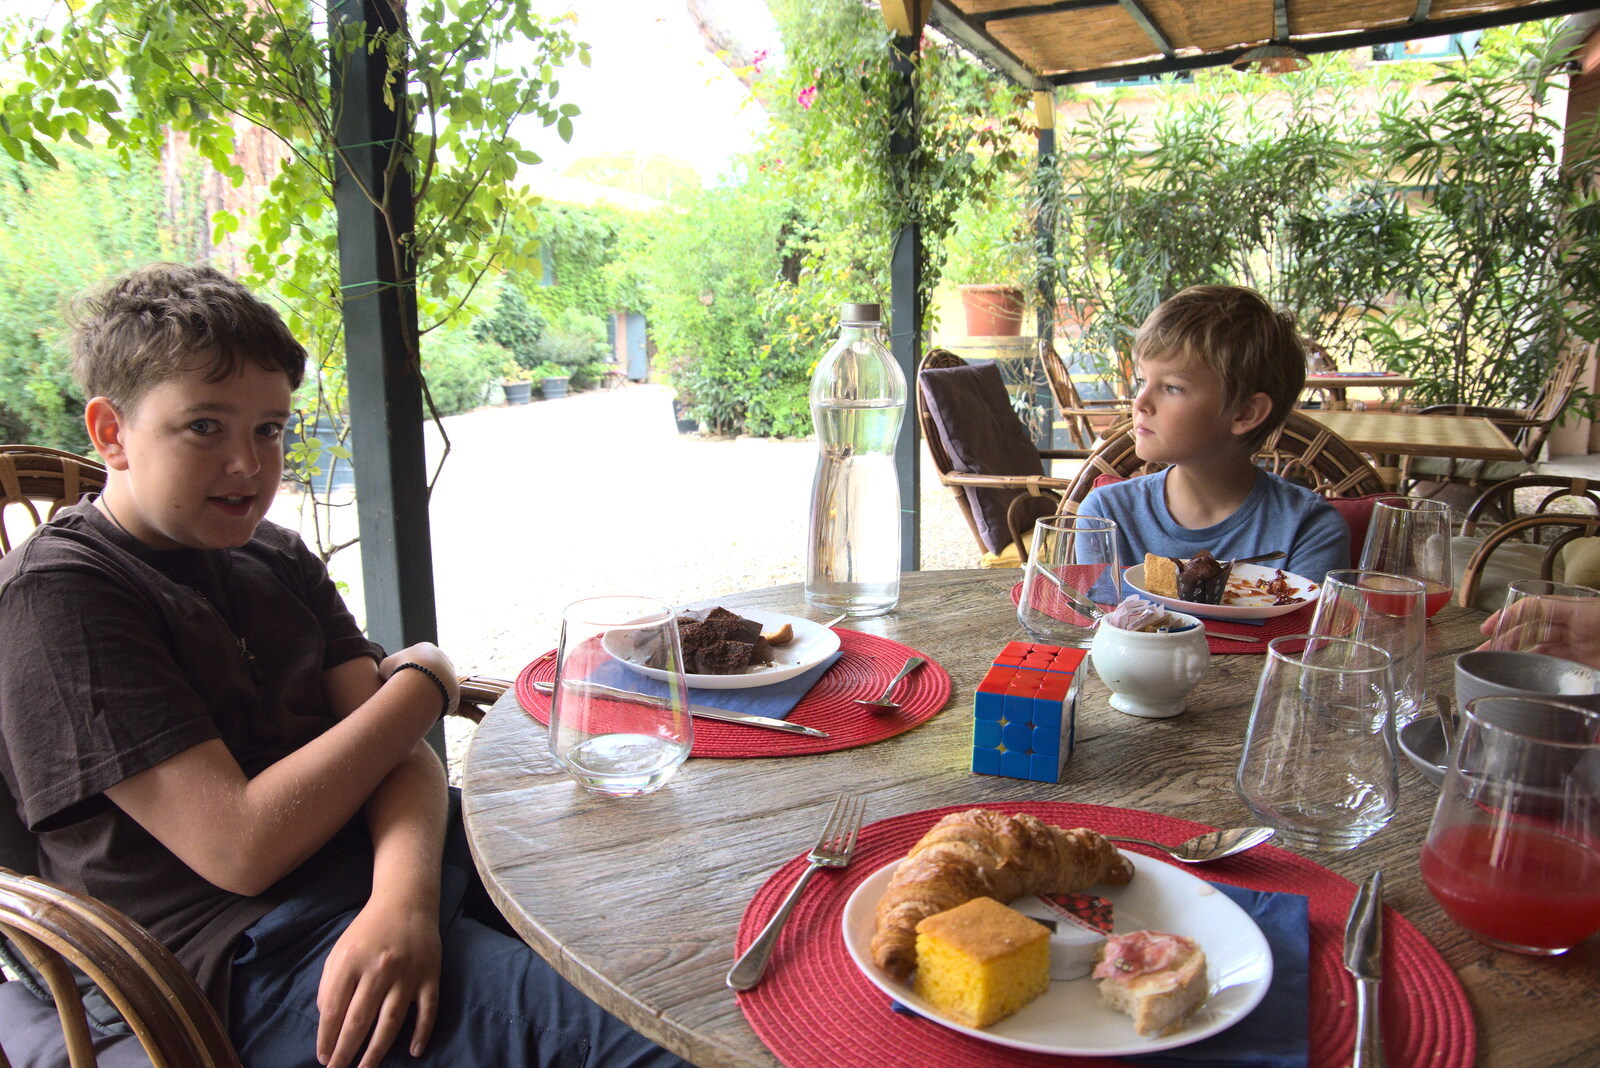 A Day by the Pool and a Festival Rehearsal, Arezzo, Italy - 3rd September 2022: The boys at breakfast